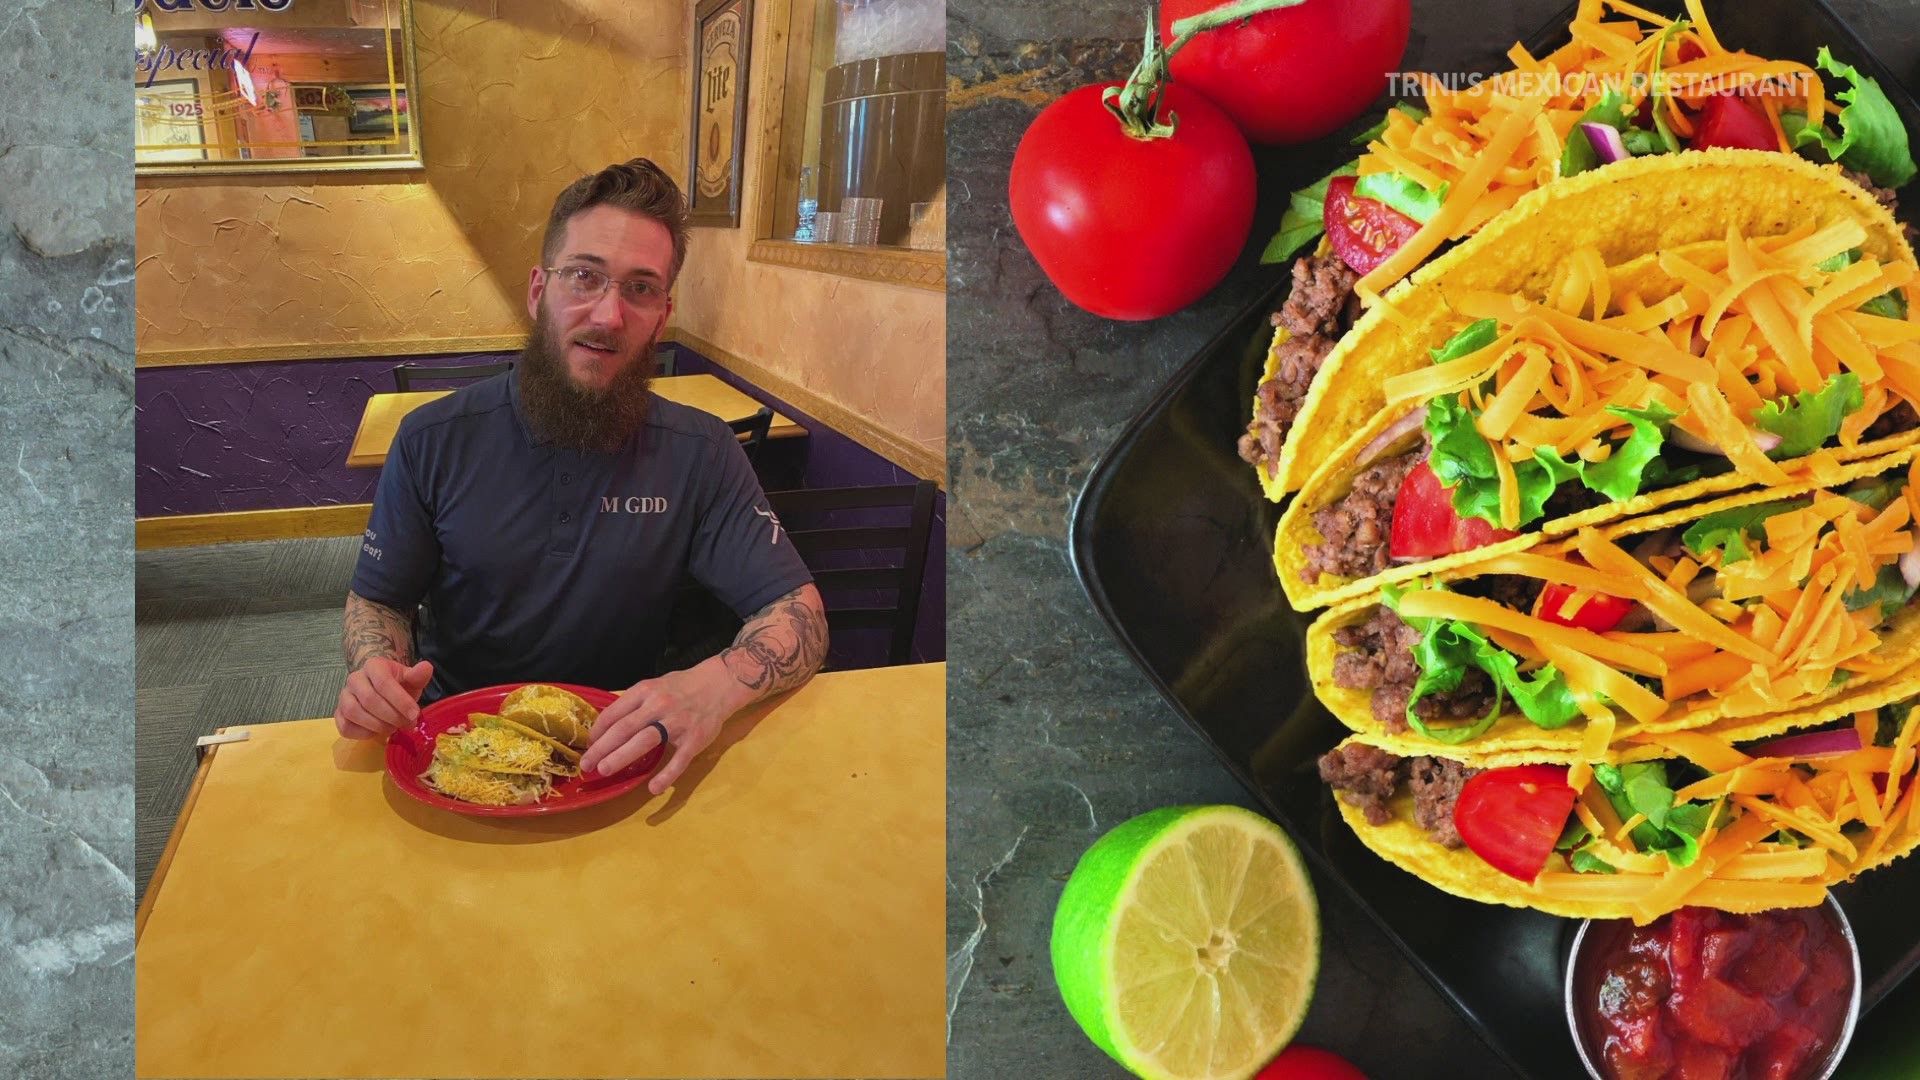 Professional eater Mark Gdd visited Trini’s Mexican Restaurant to break its taco-eating record. 41 tacos later, Gdd succeeded.